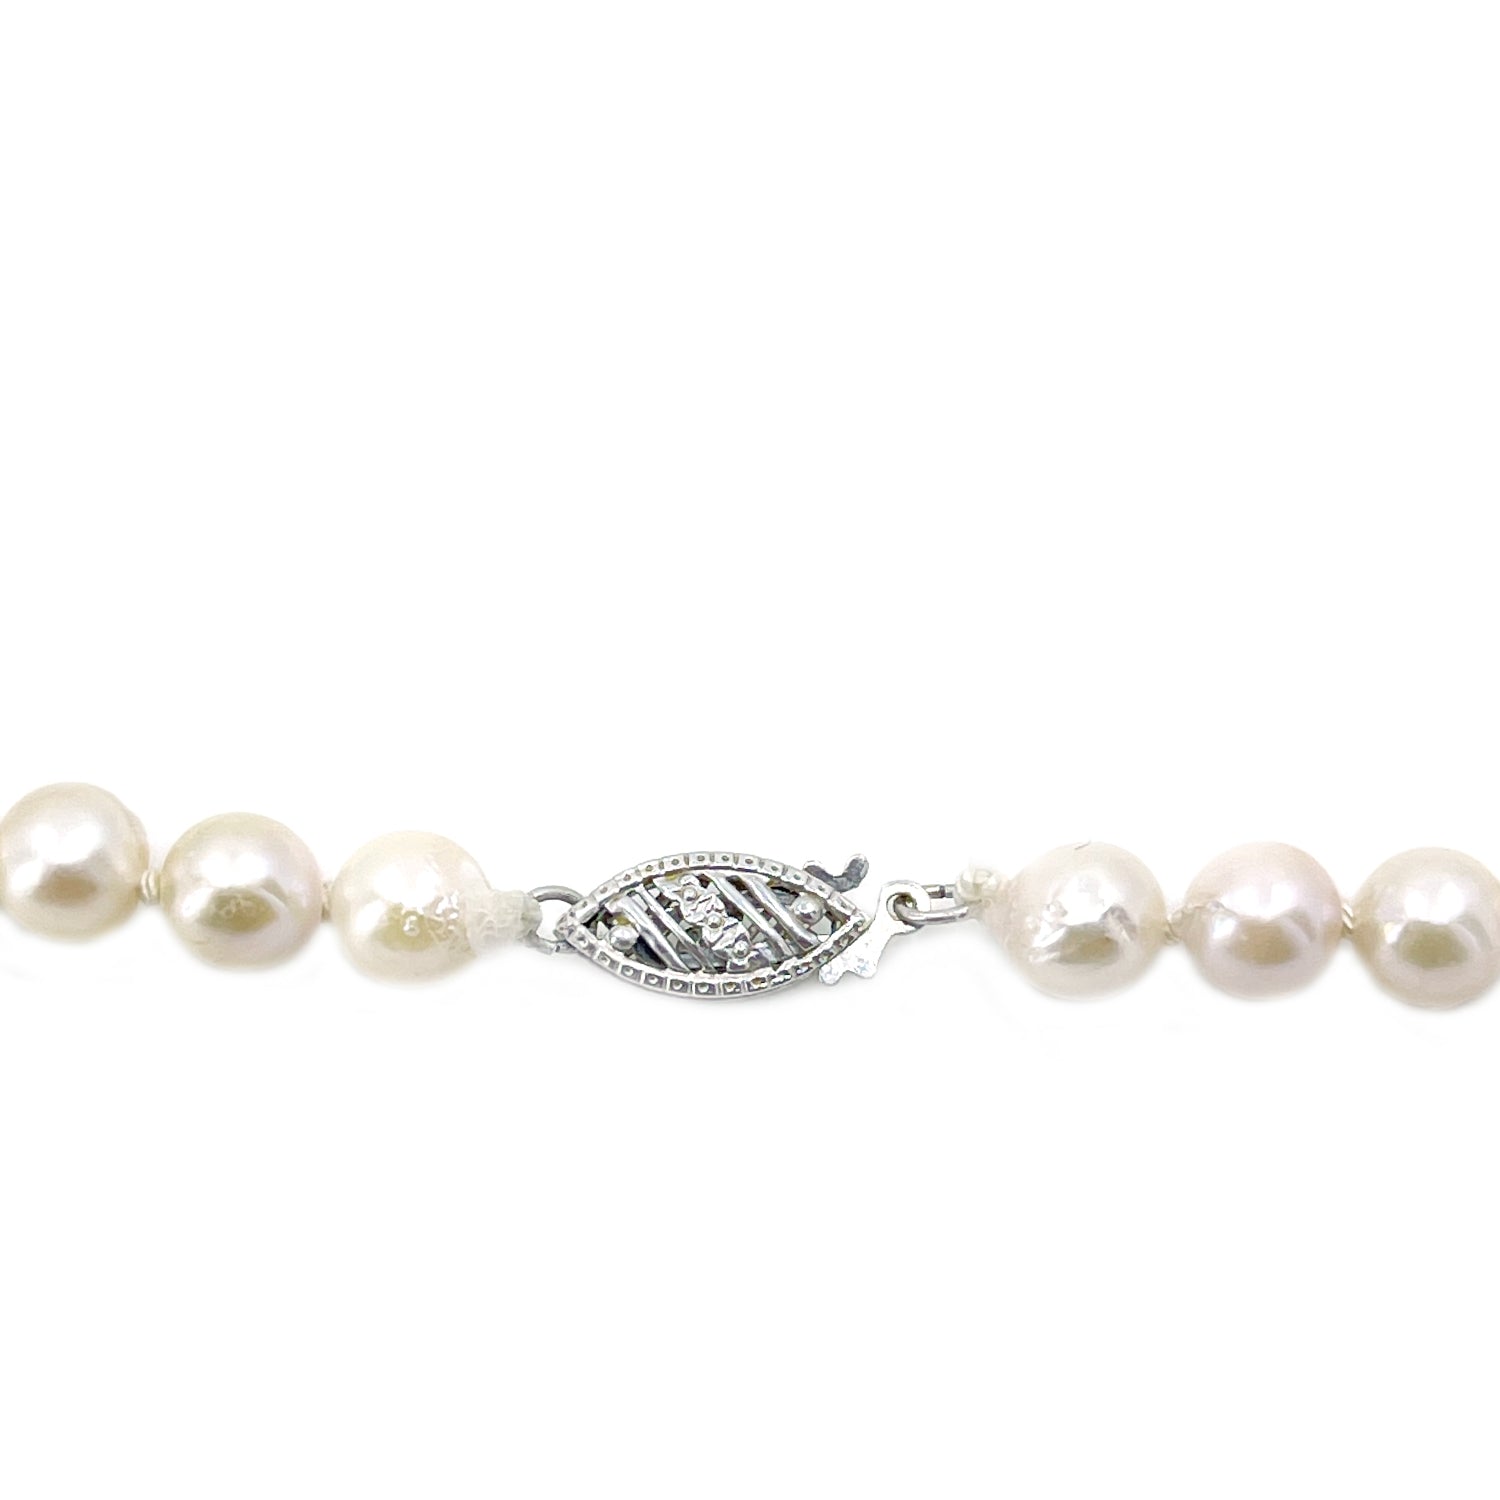 Retro Rosy Japanese Saltwater Cultured Akoya Pearl Necklace - 14K White Gold 19.50 Inch